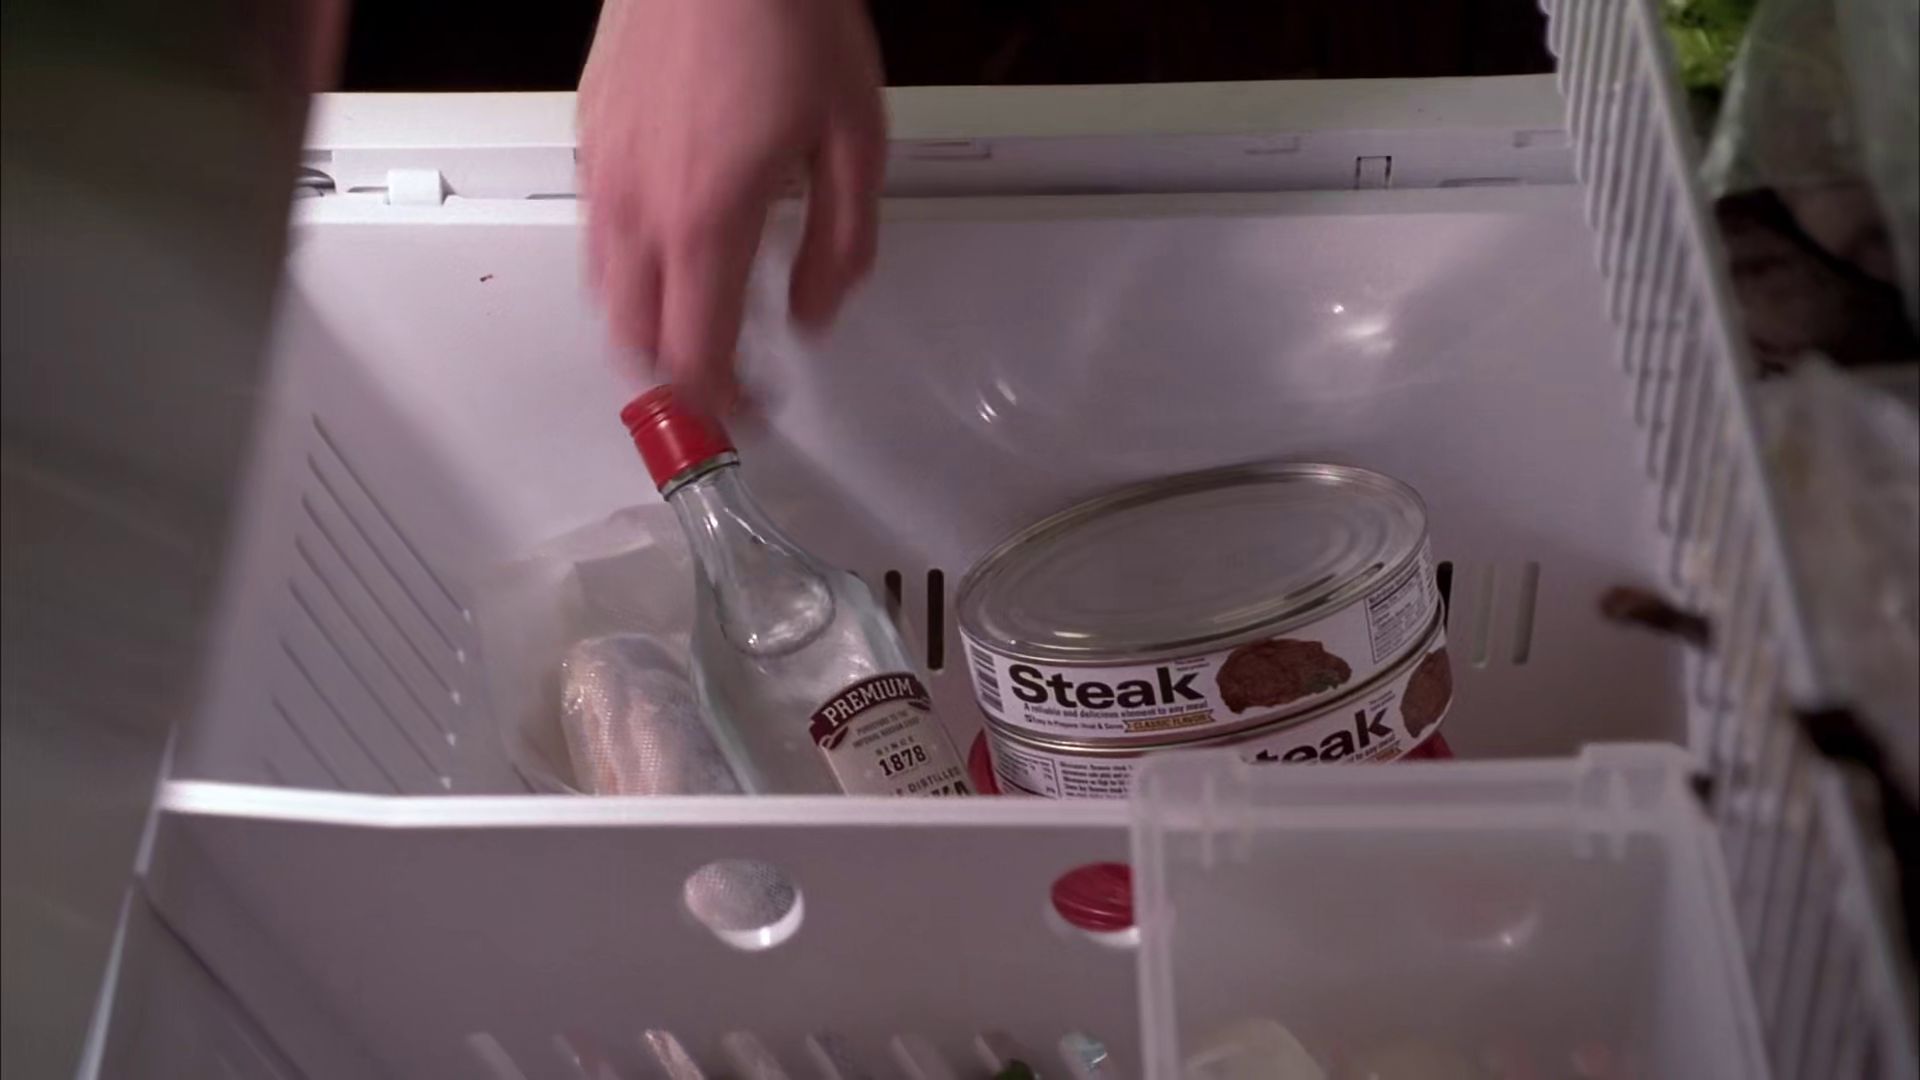 Potential Future: Canned steak